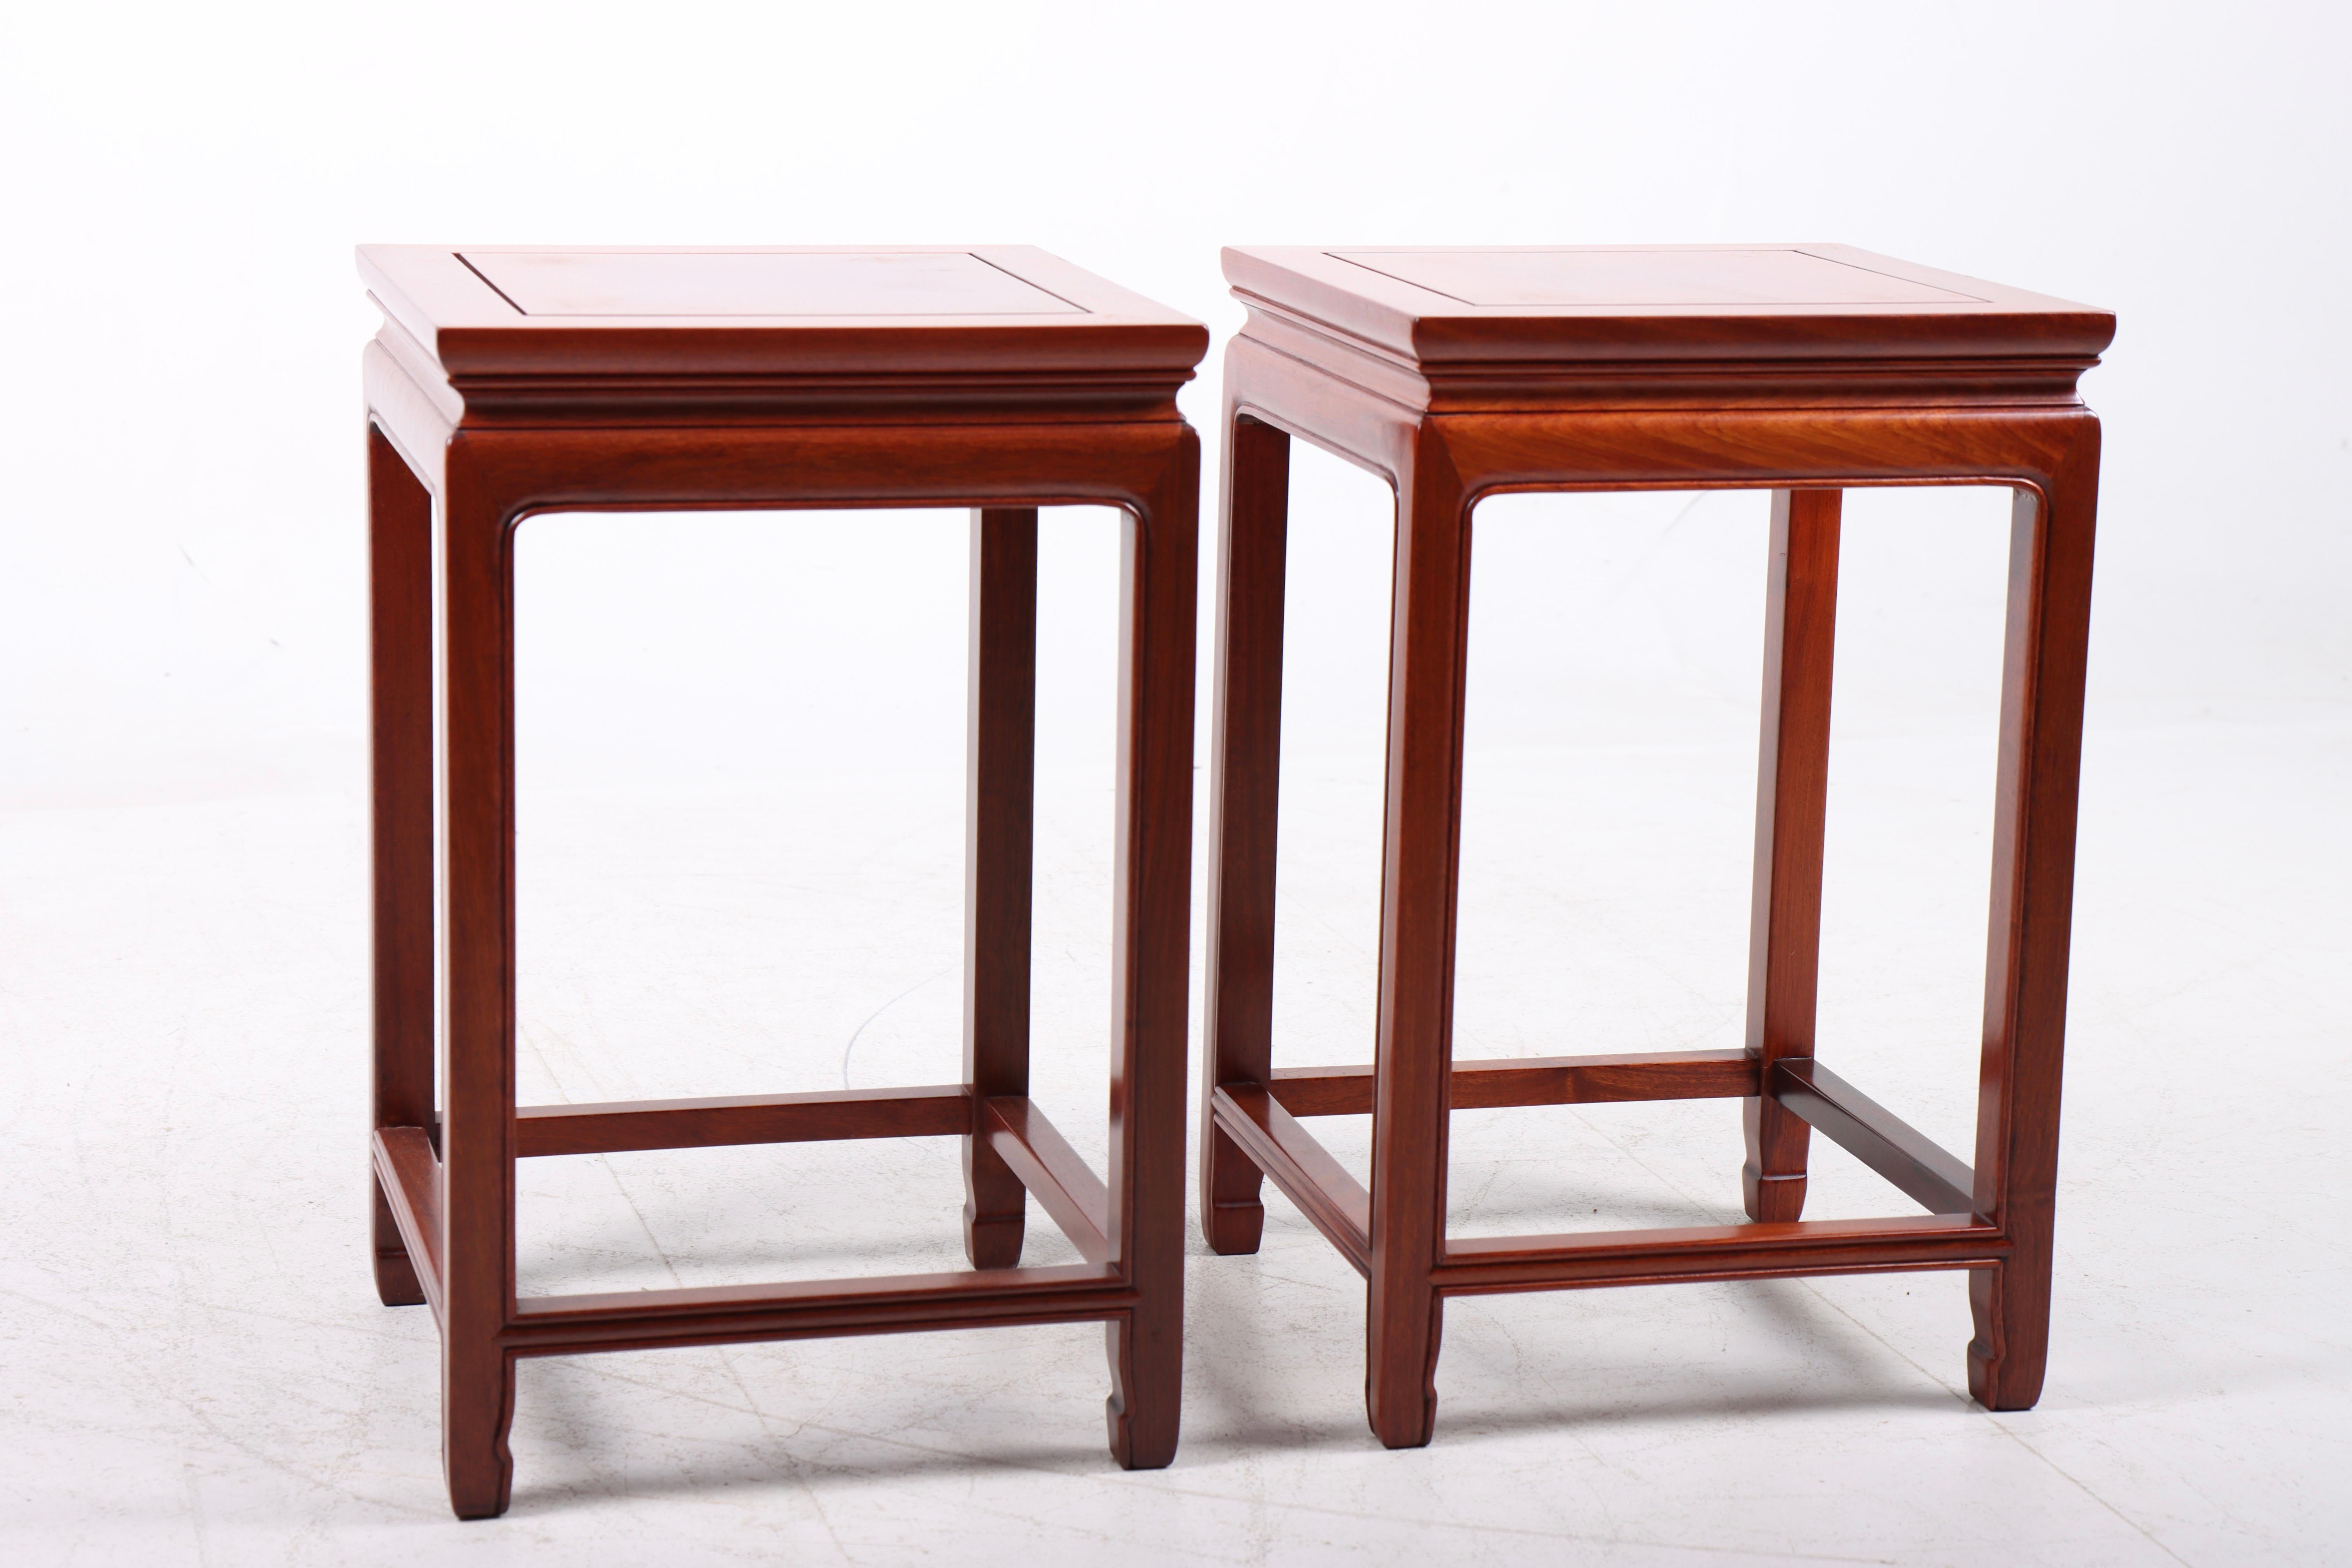 Mid-20th Century Pair of Chinese Side Tables in Mahogany, 1960s For Sale